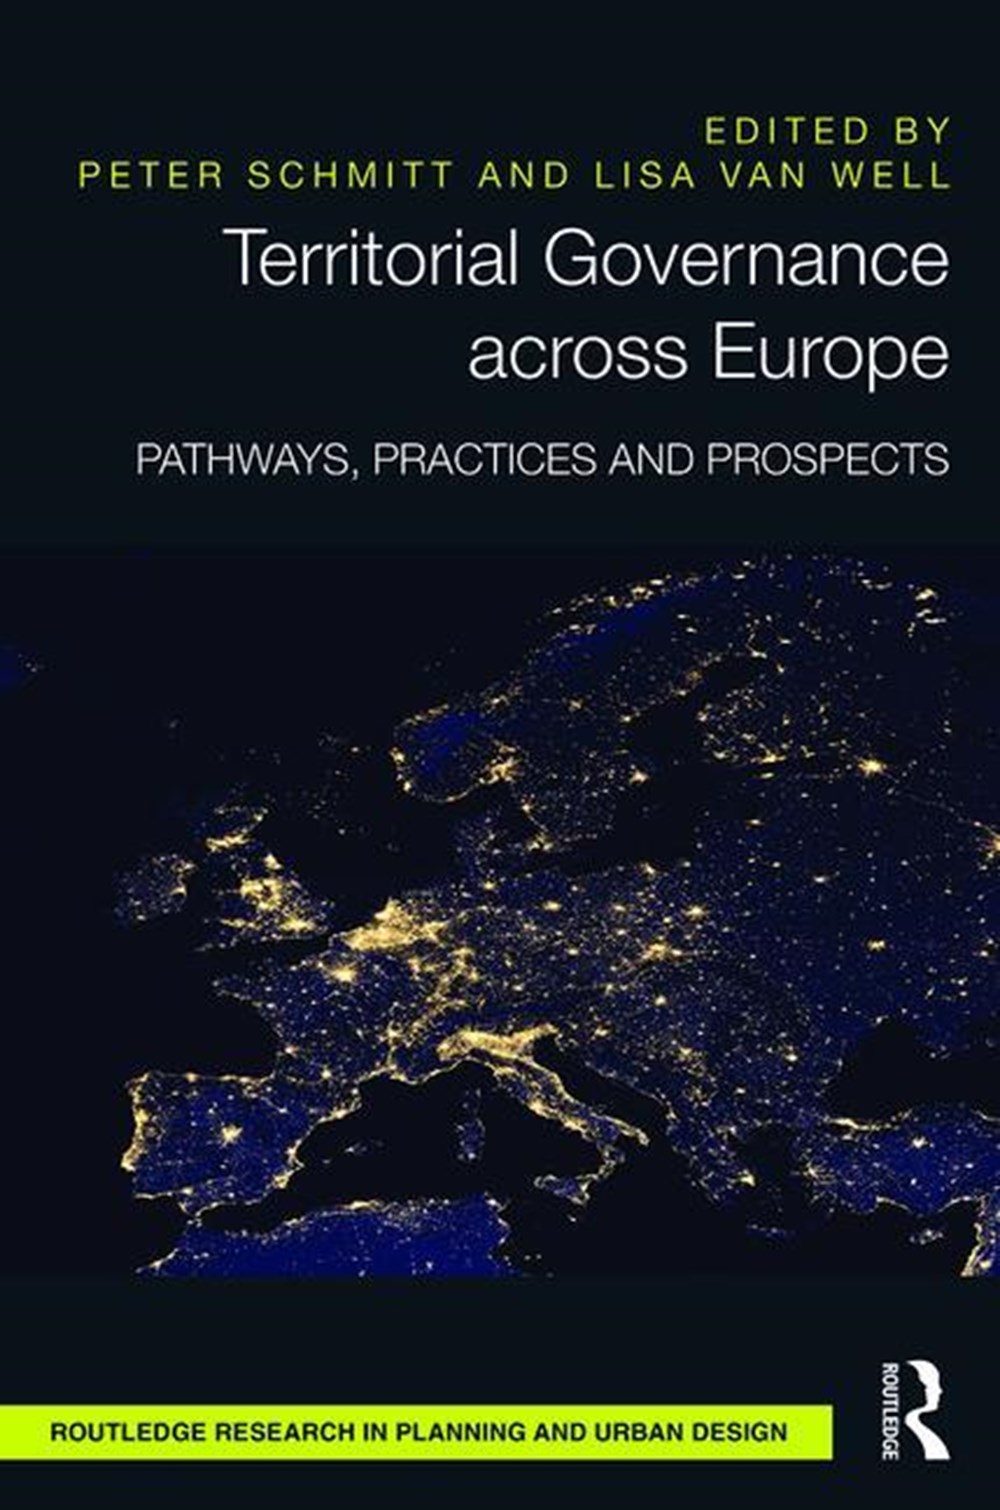 Territorial Governance across Europe: Pathways, Practices and Prospects